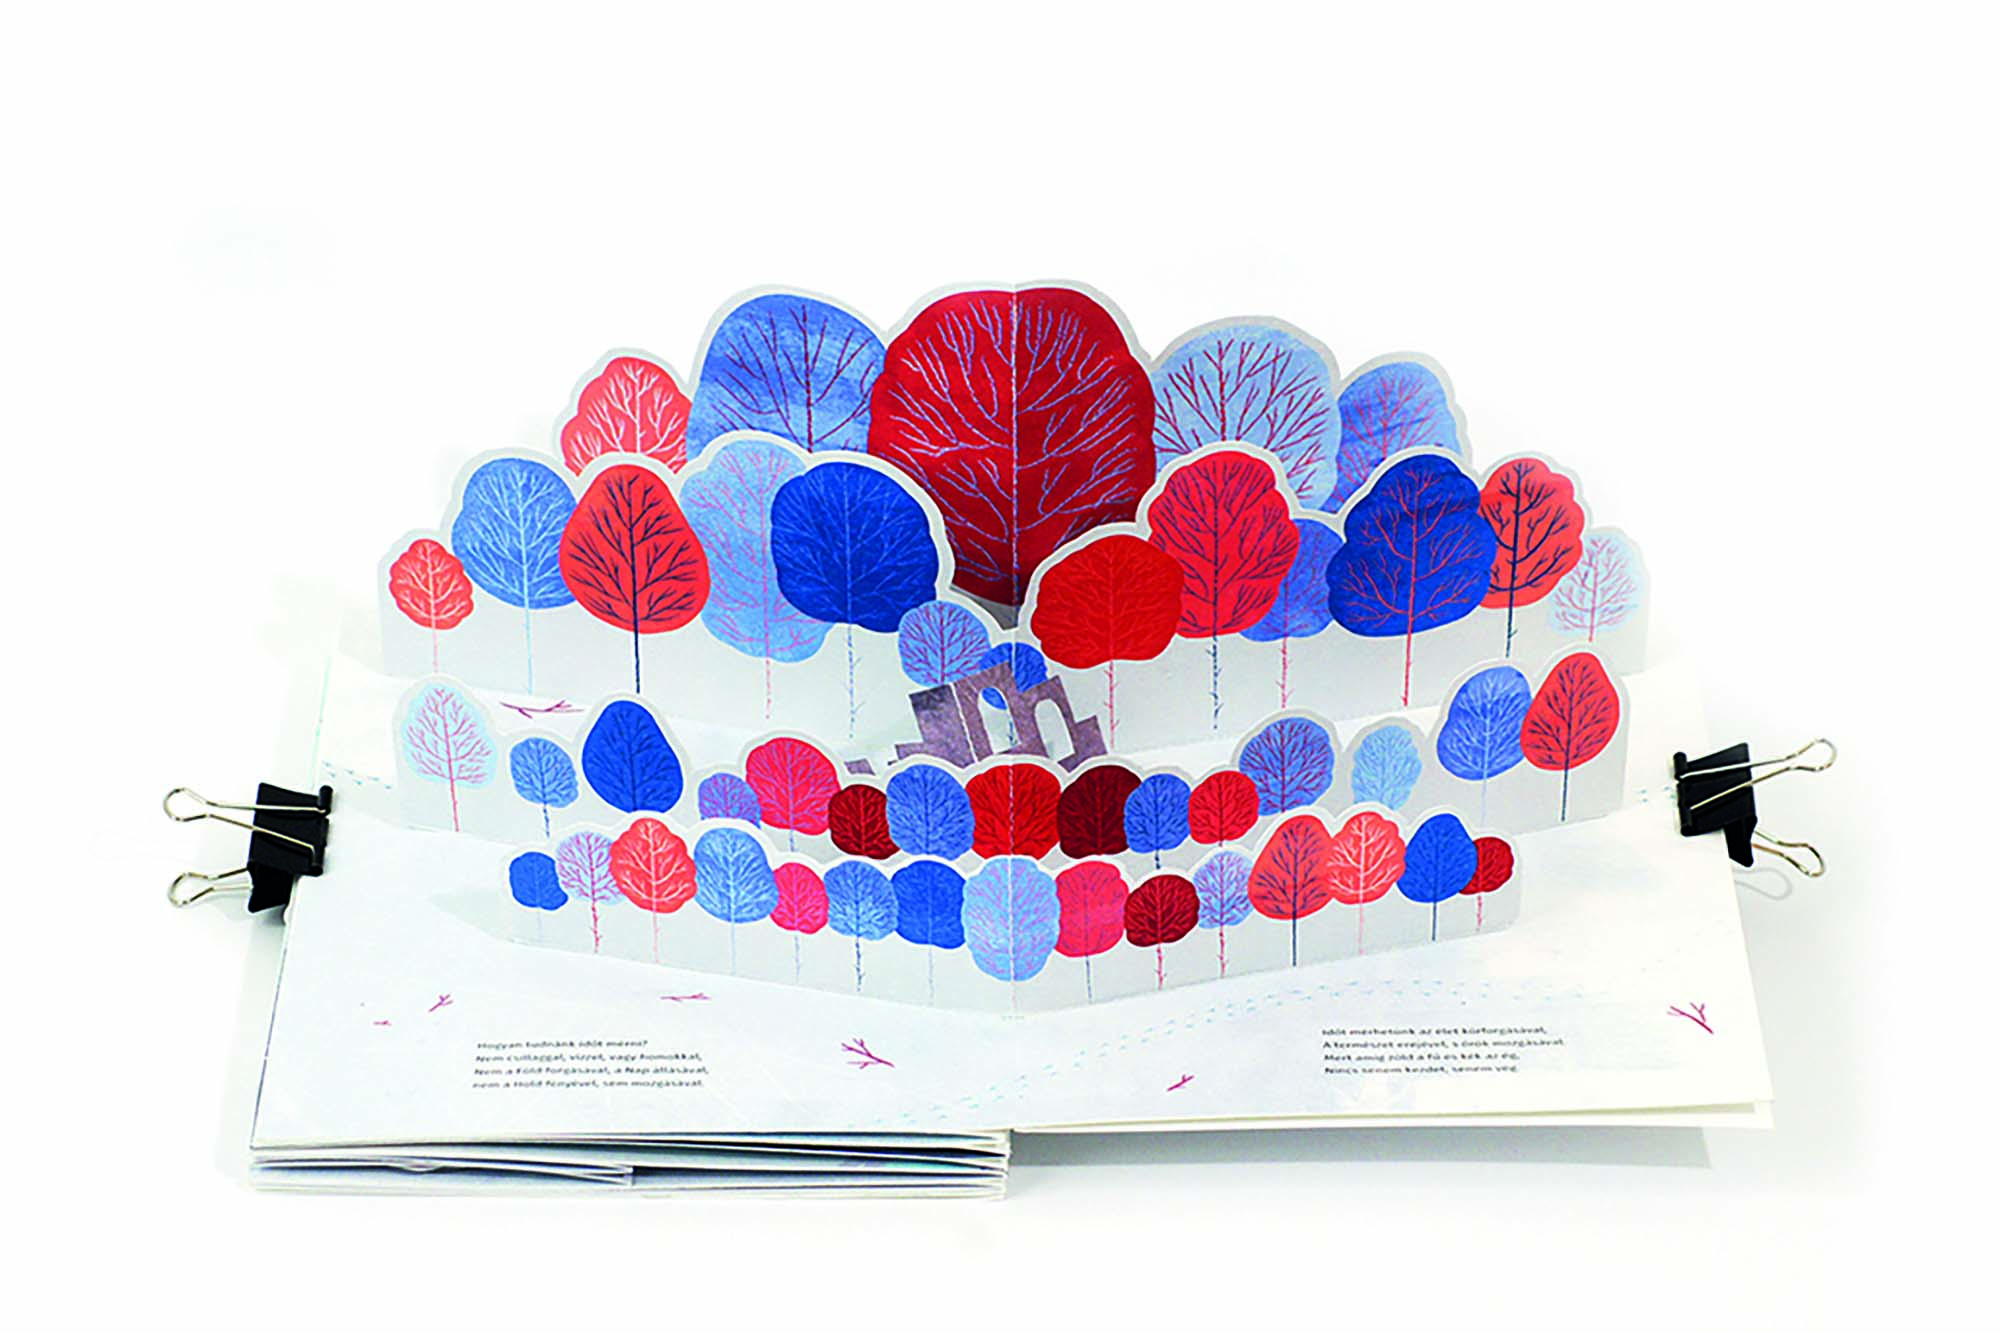 Pop-up book 22 Day-AfterTomorrow Street